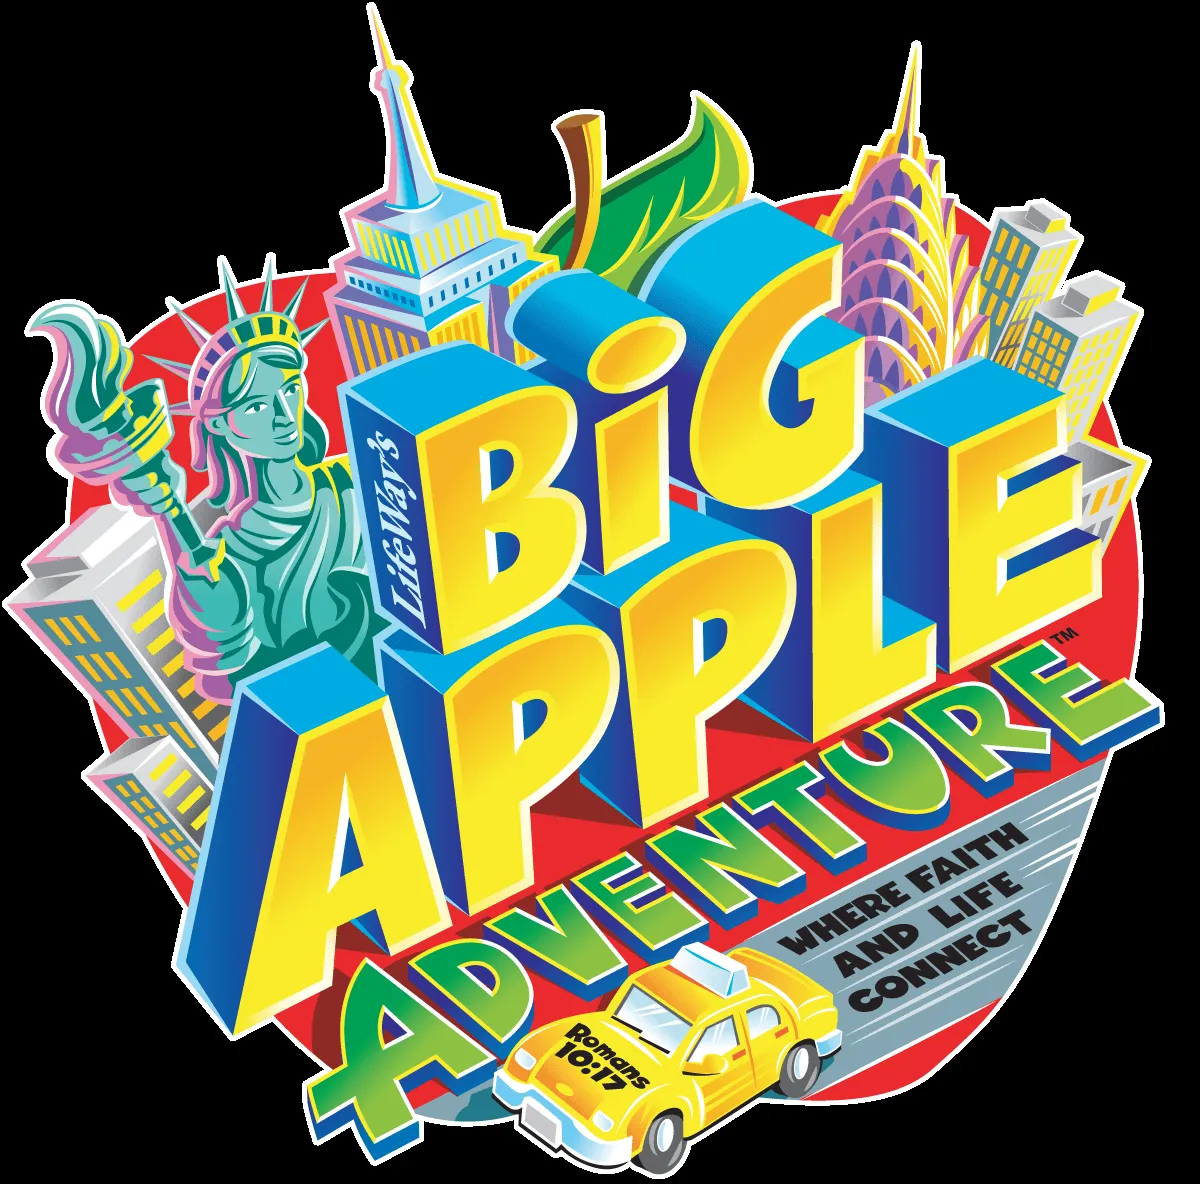 Related Searches for big apple logo